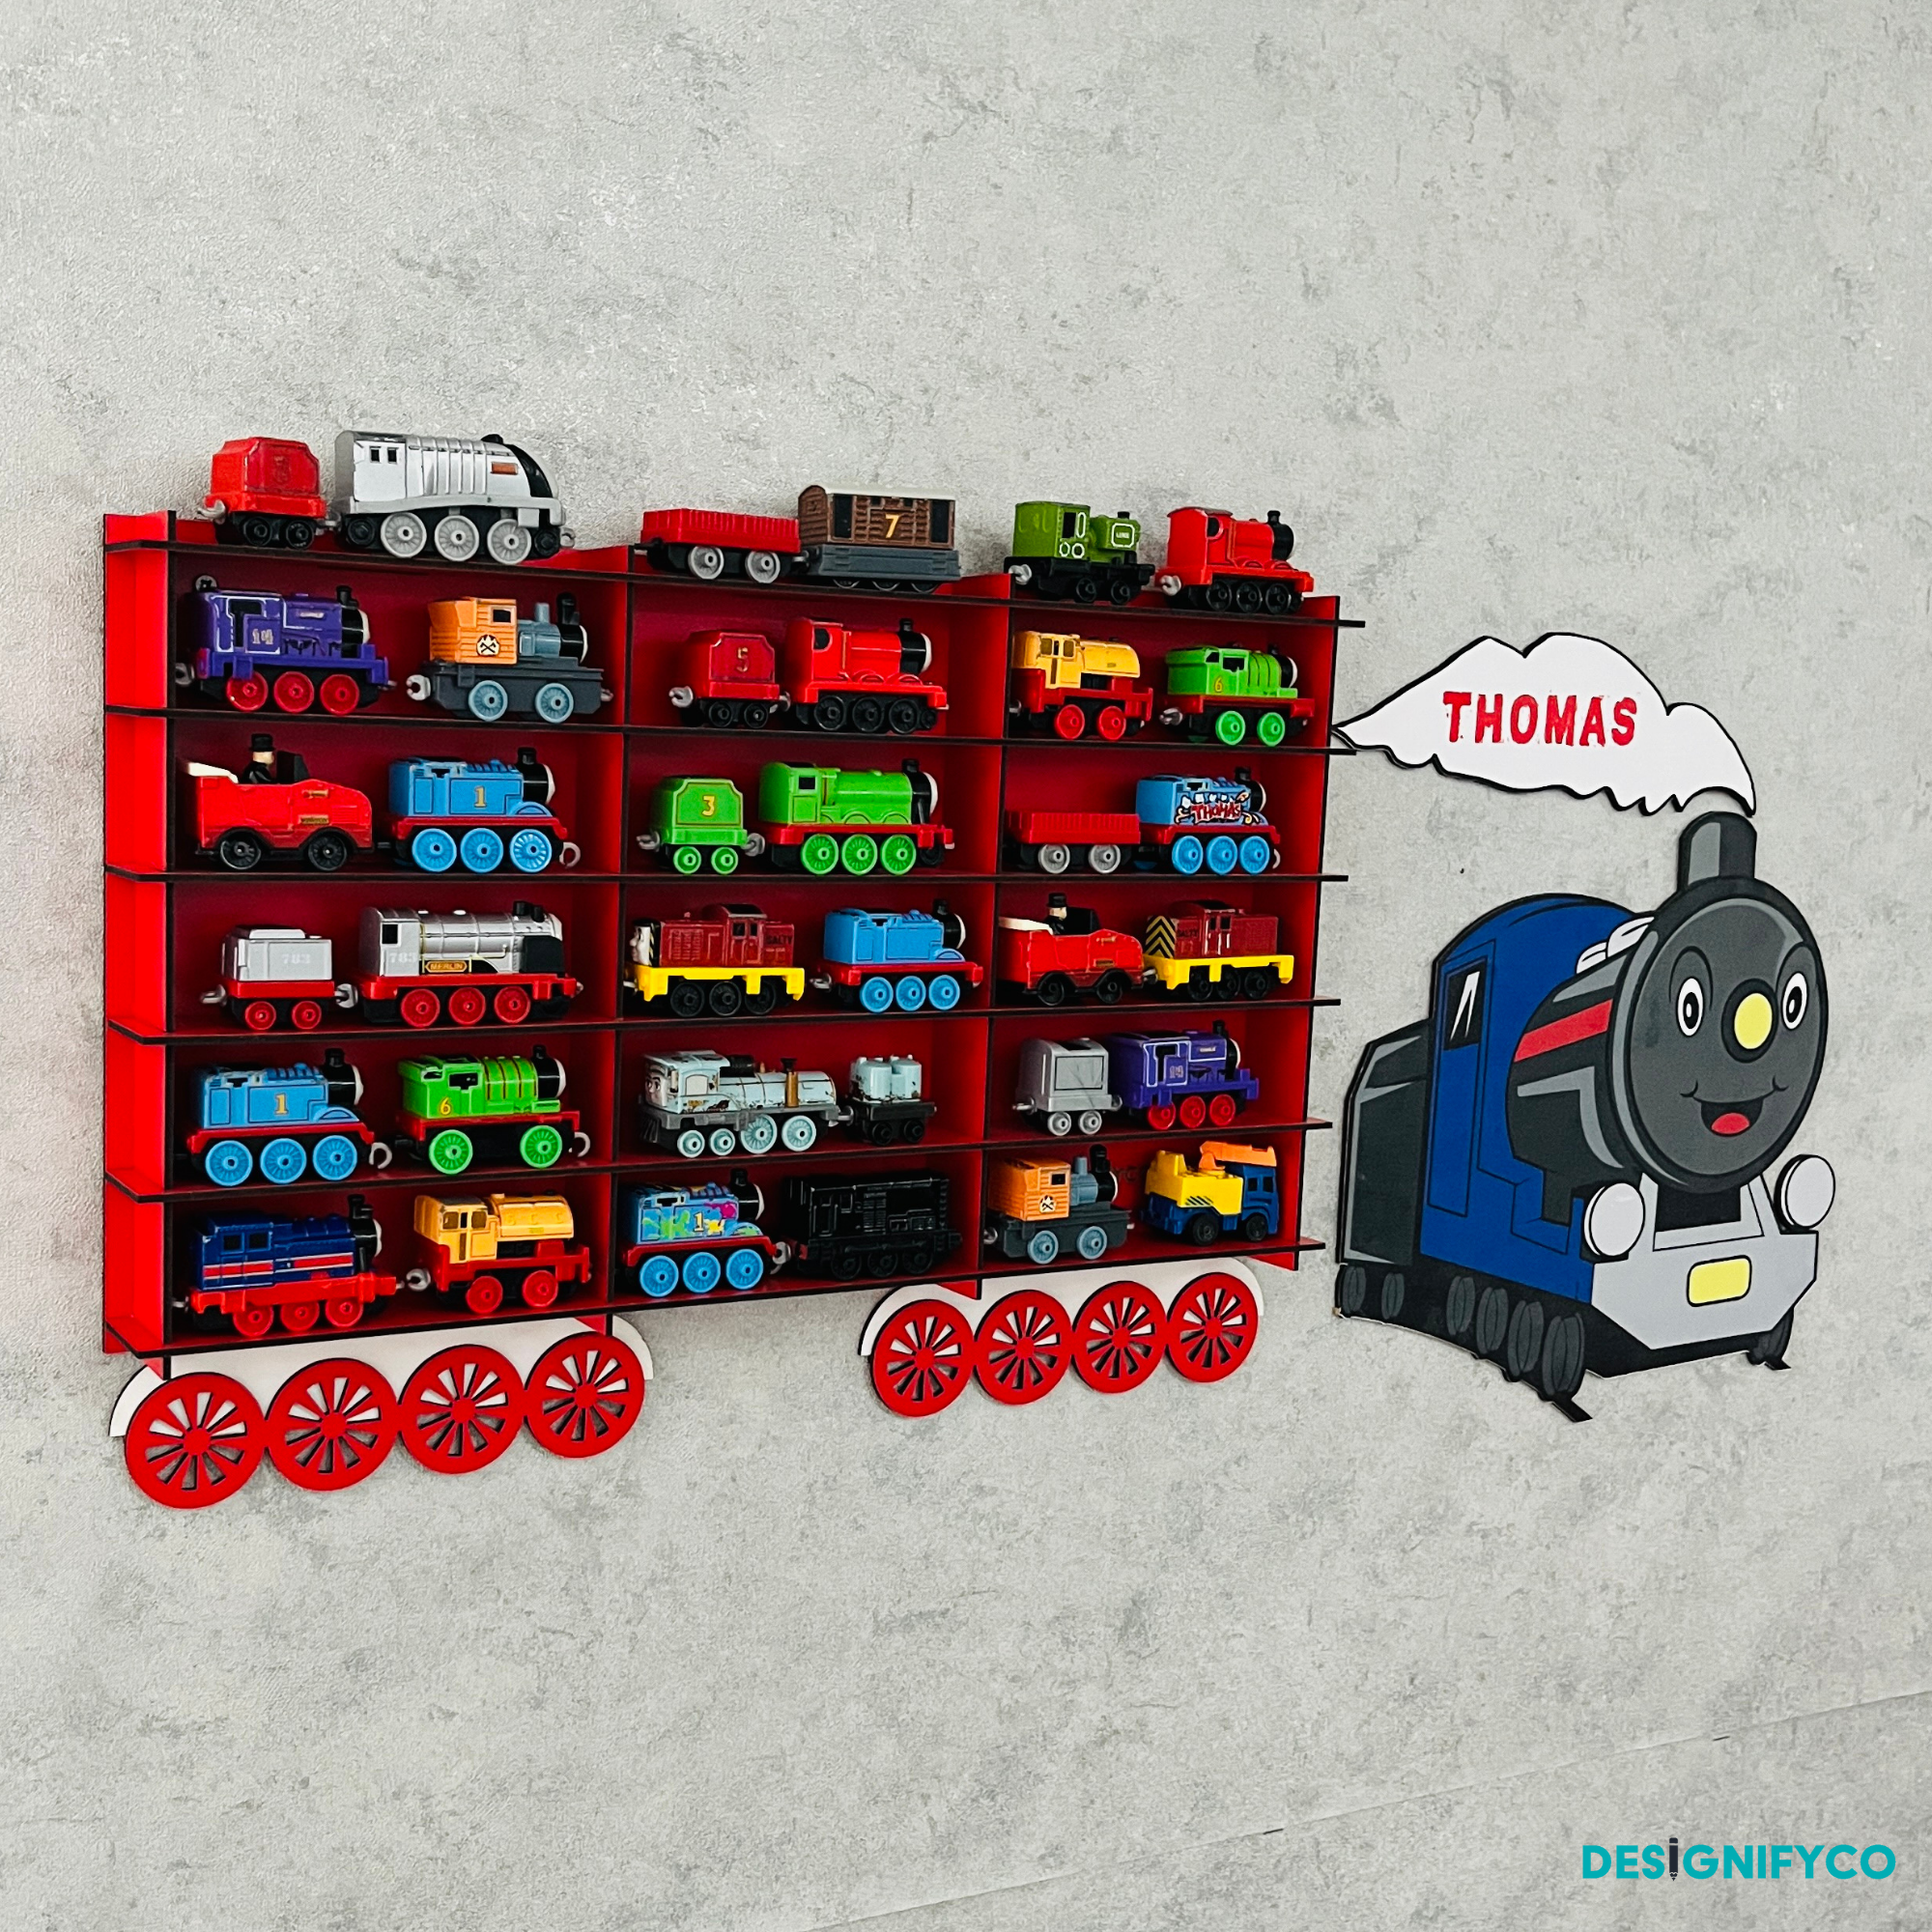 Red Toy Train Displays